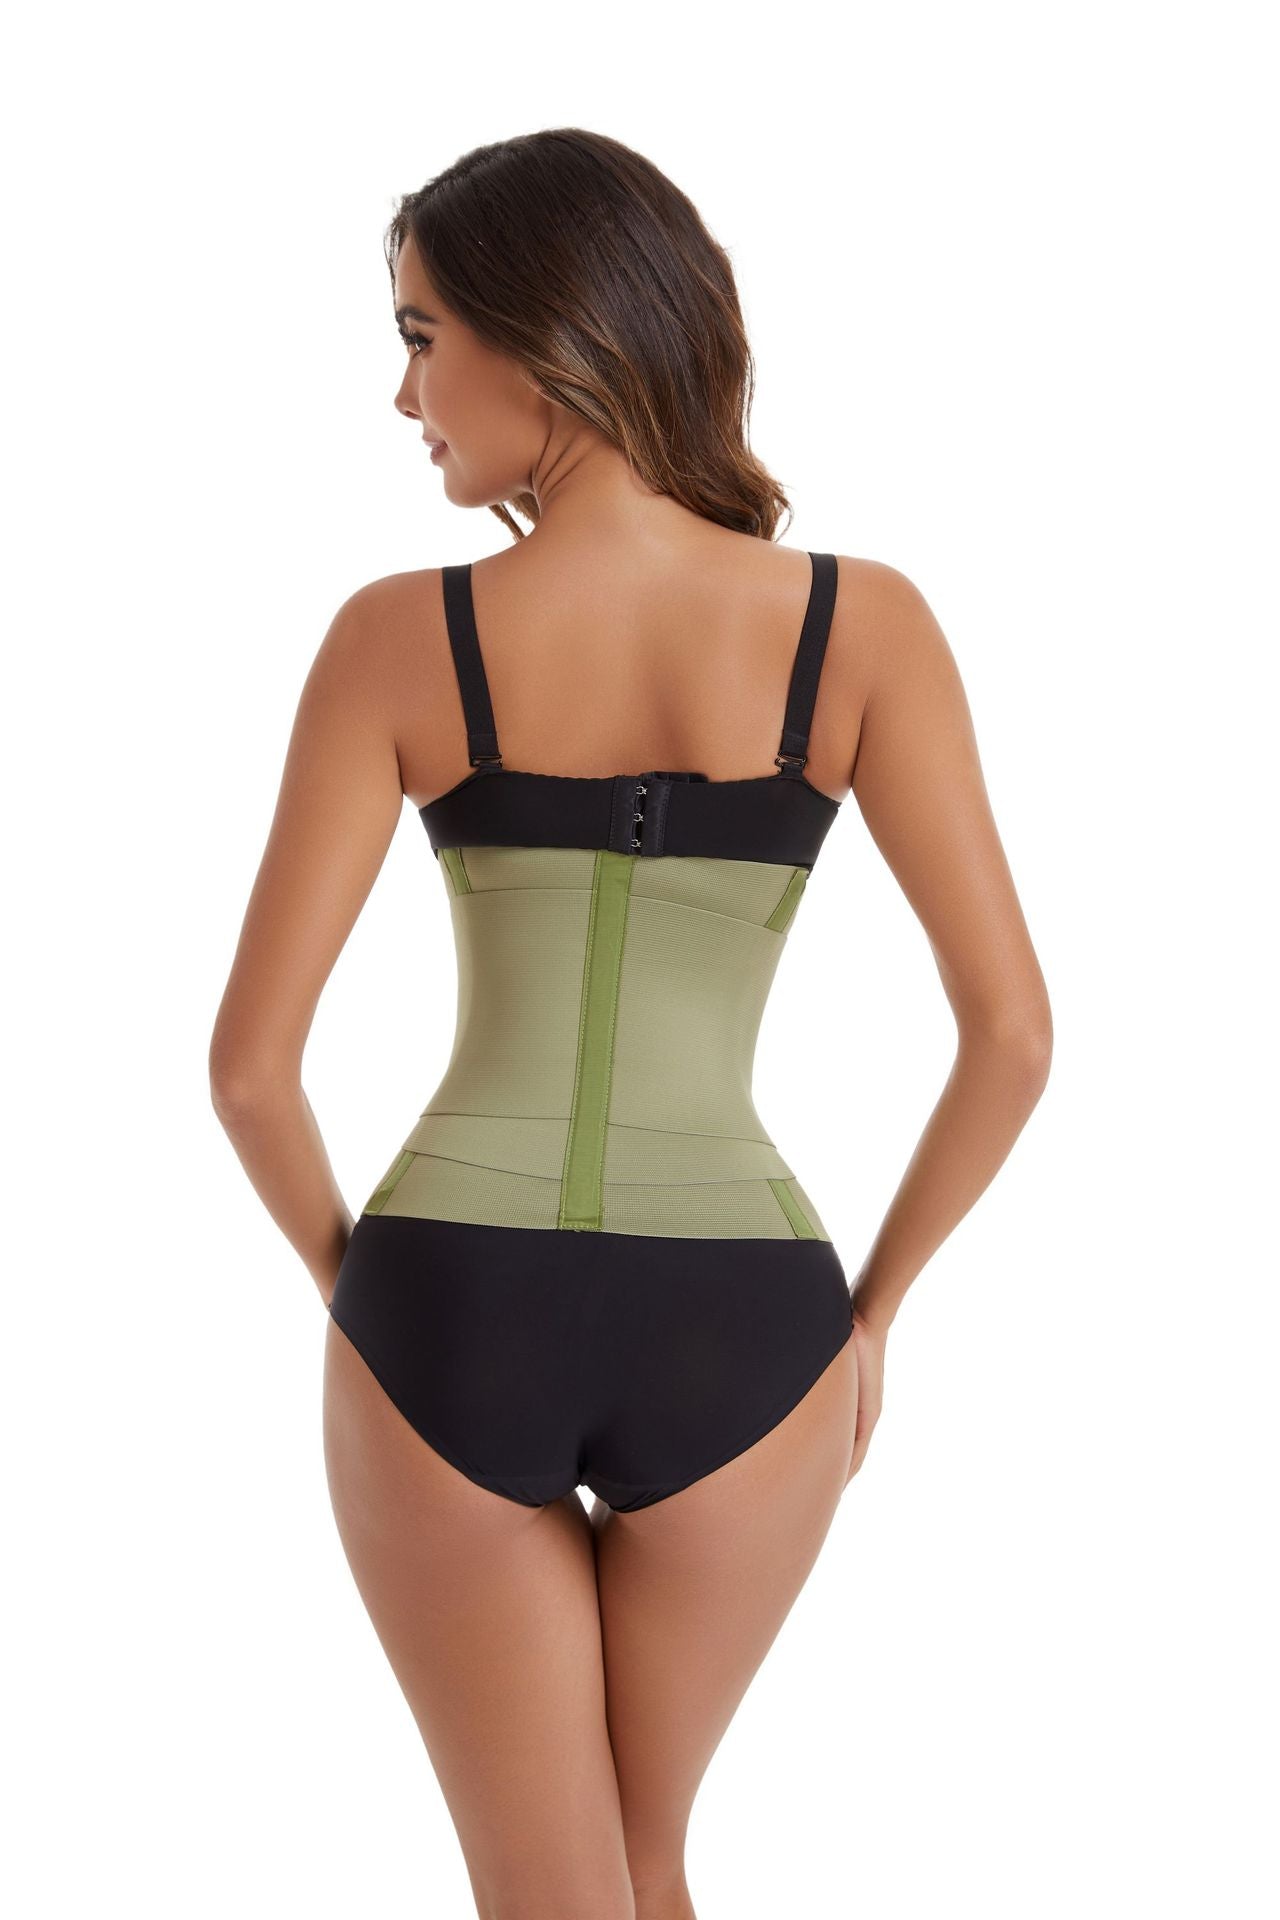 Strengthen Three Reinforcing Band Body Shaping Wear